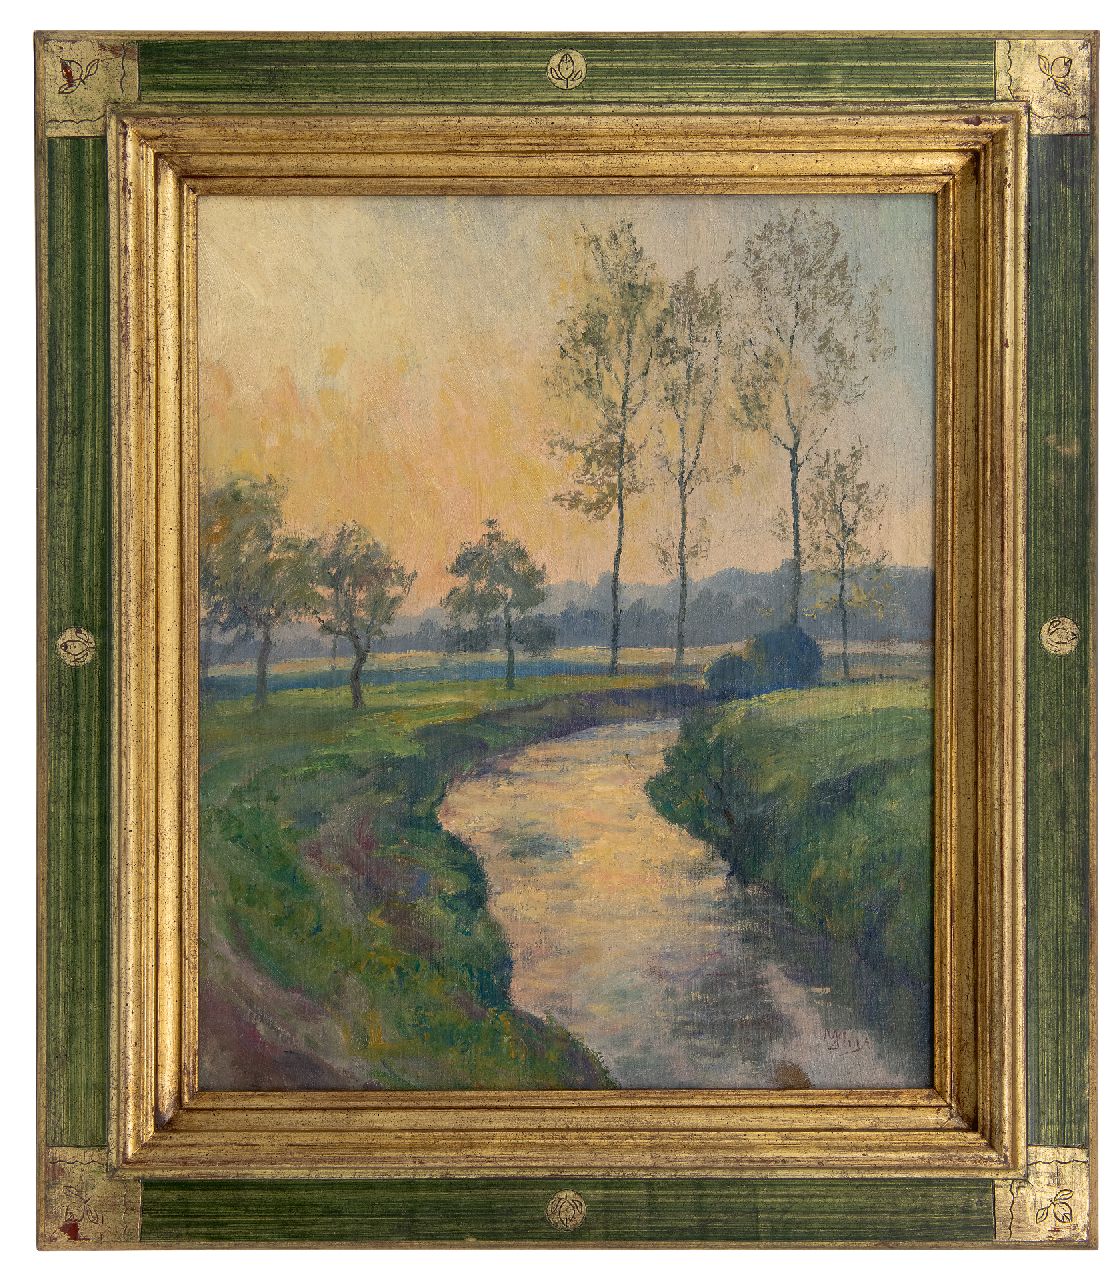 Huys M.  | Modest Huys | Paintings offered for sale | Landscape with a stream, oil on canvas 60.5 x 50.3 cm, signed l.r.